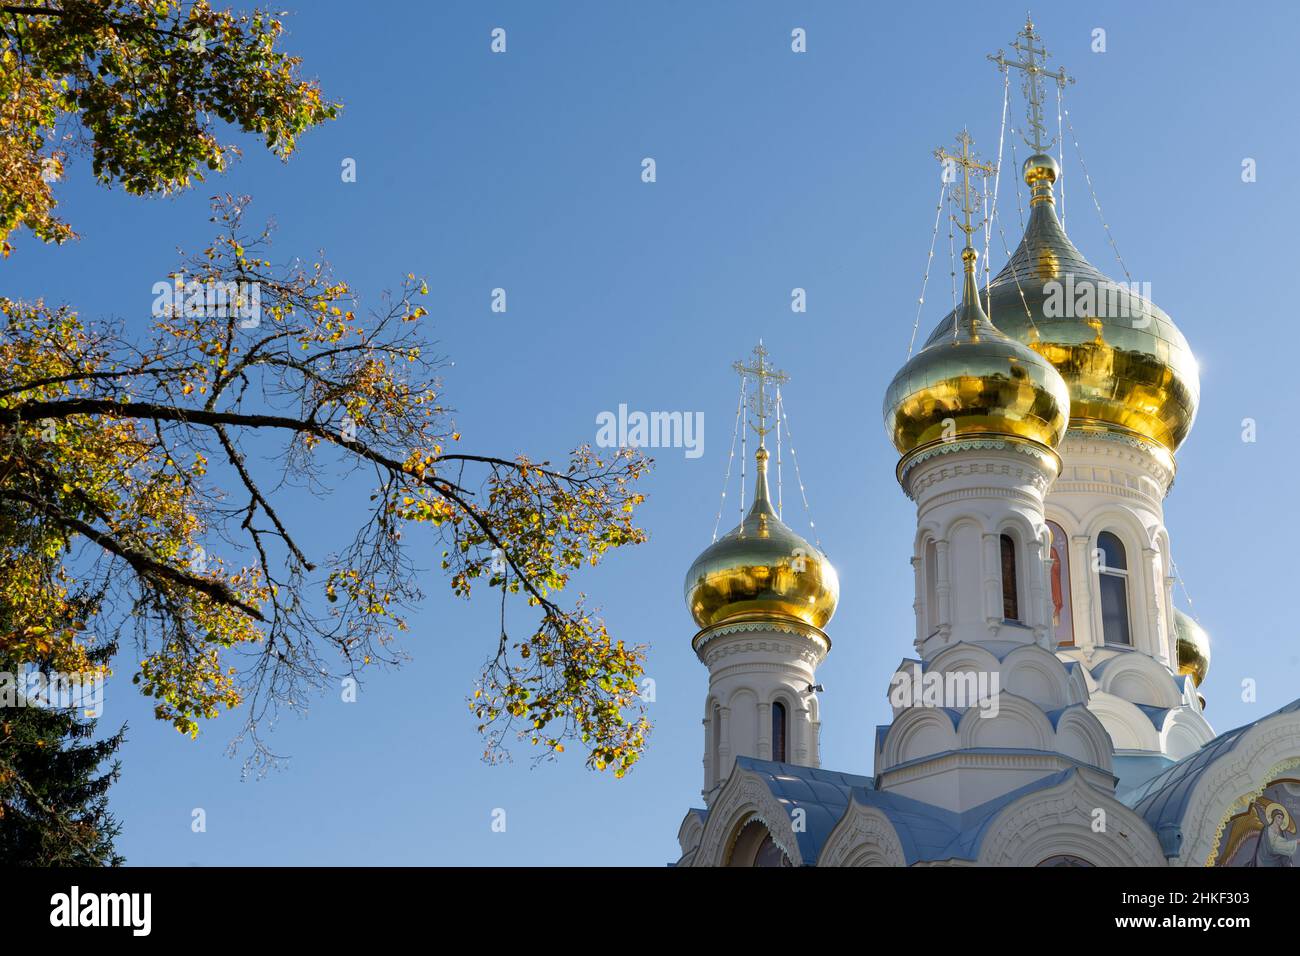 Karlovy Vary (Karlsbad) in Czech Republic: Steeples and golden cupolas of Russian orthodox church Saint Peter and Paul Stock Photo